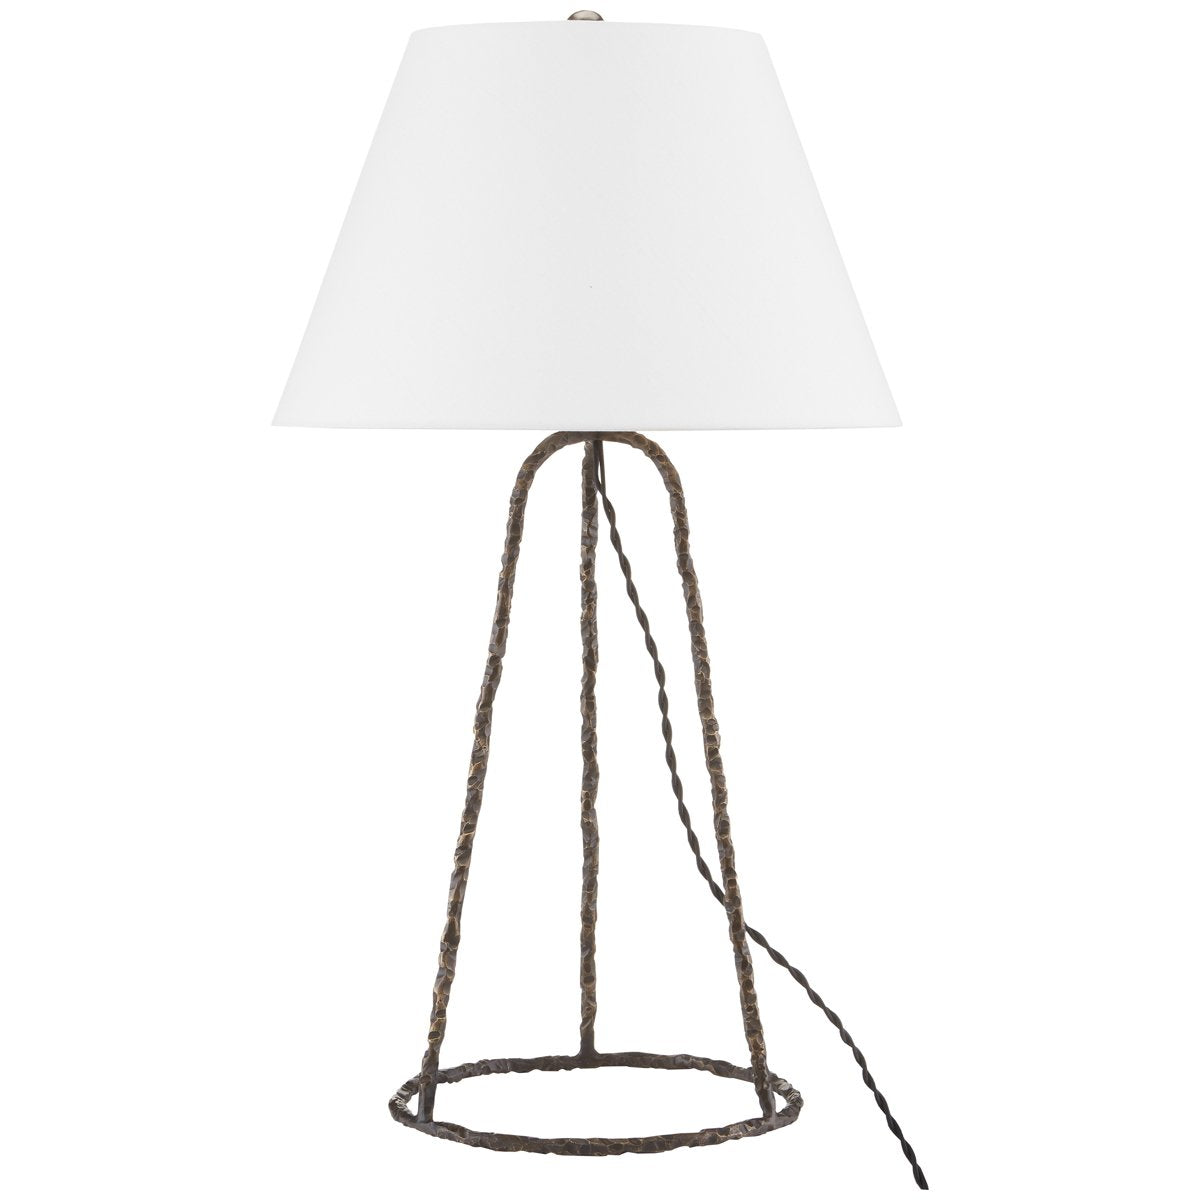 Currey and Company Annetta Table Lamp